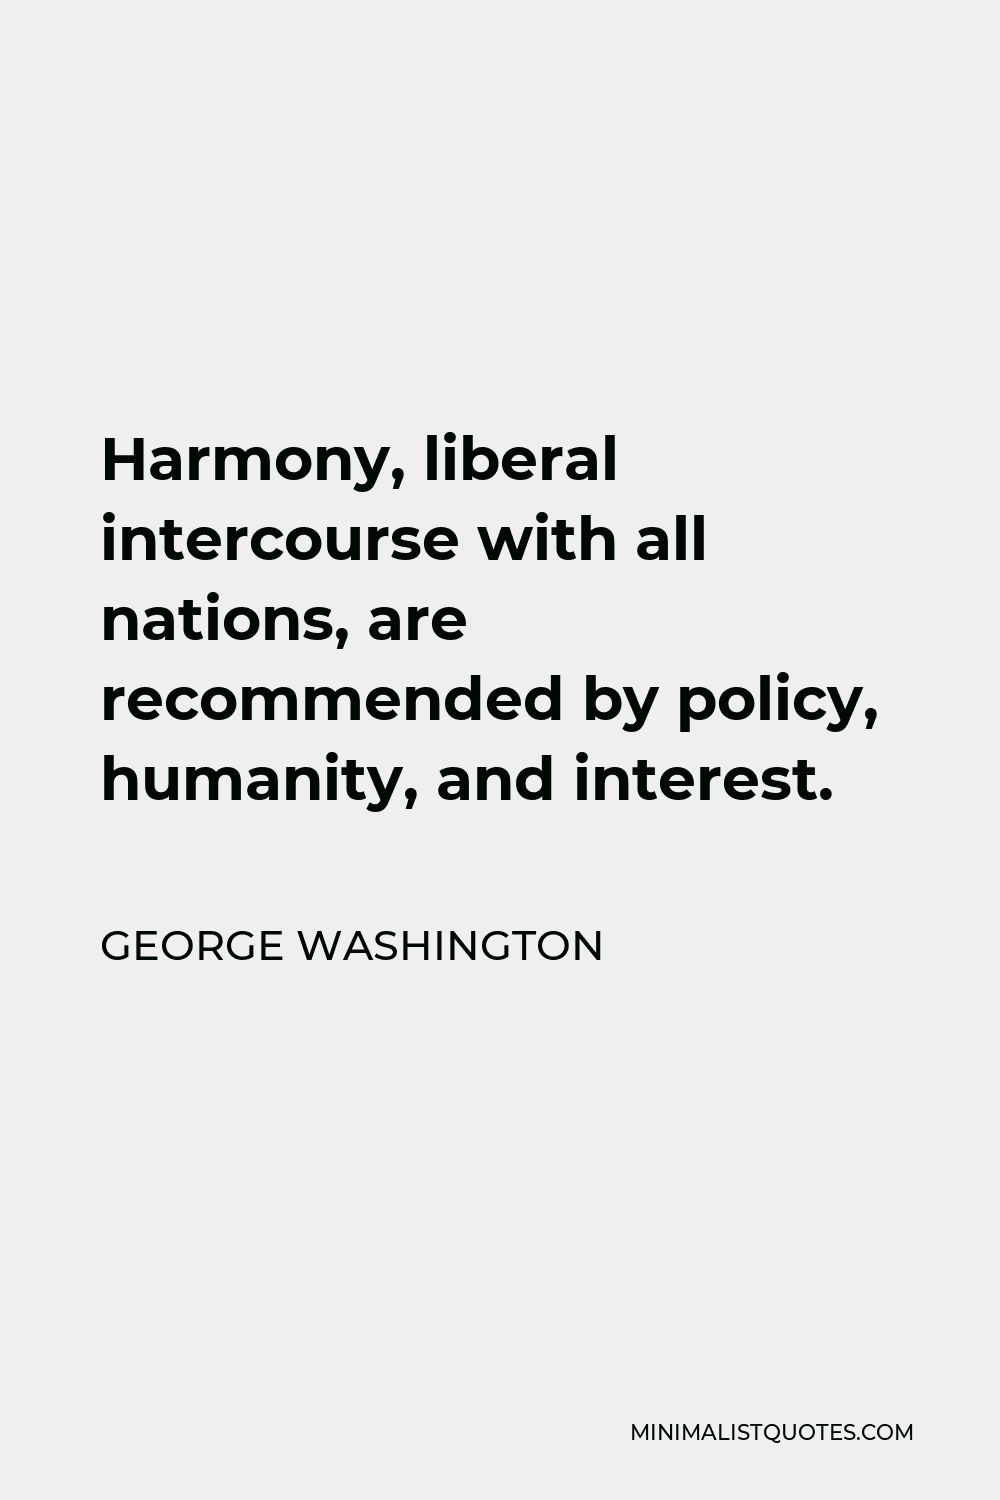 George Washington Quote - Harmony, liberal intercourse with all nations, are recommended by policy, humanity, and interest.